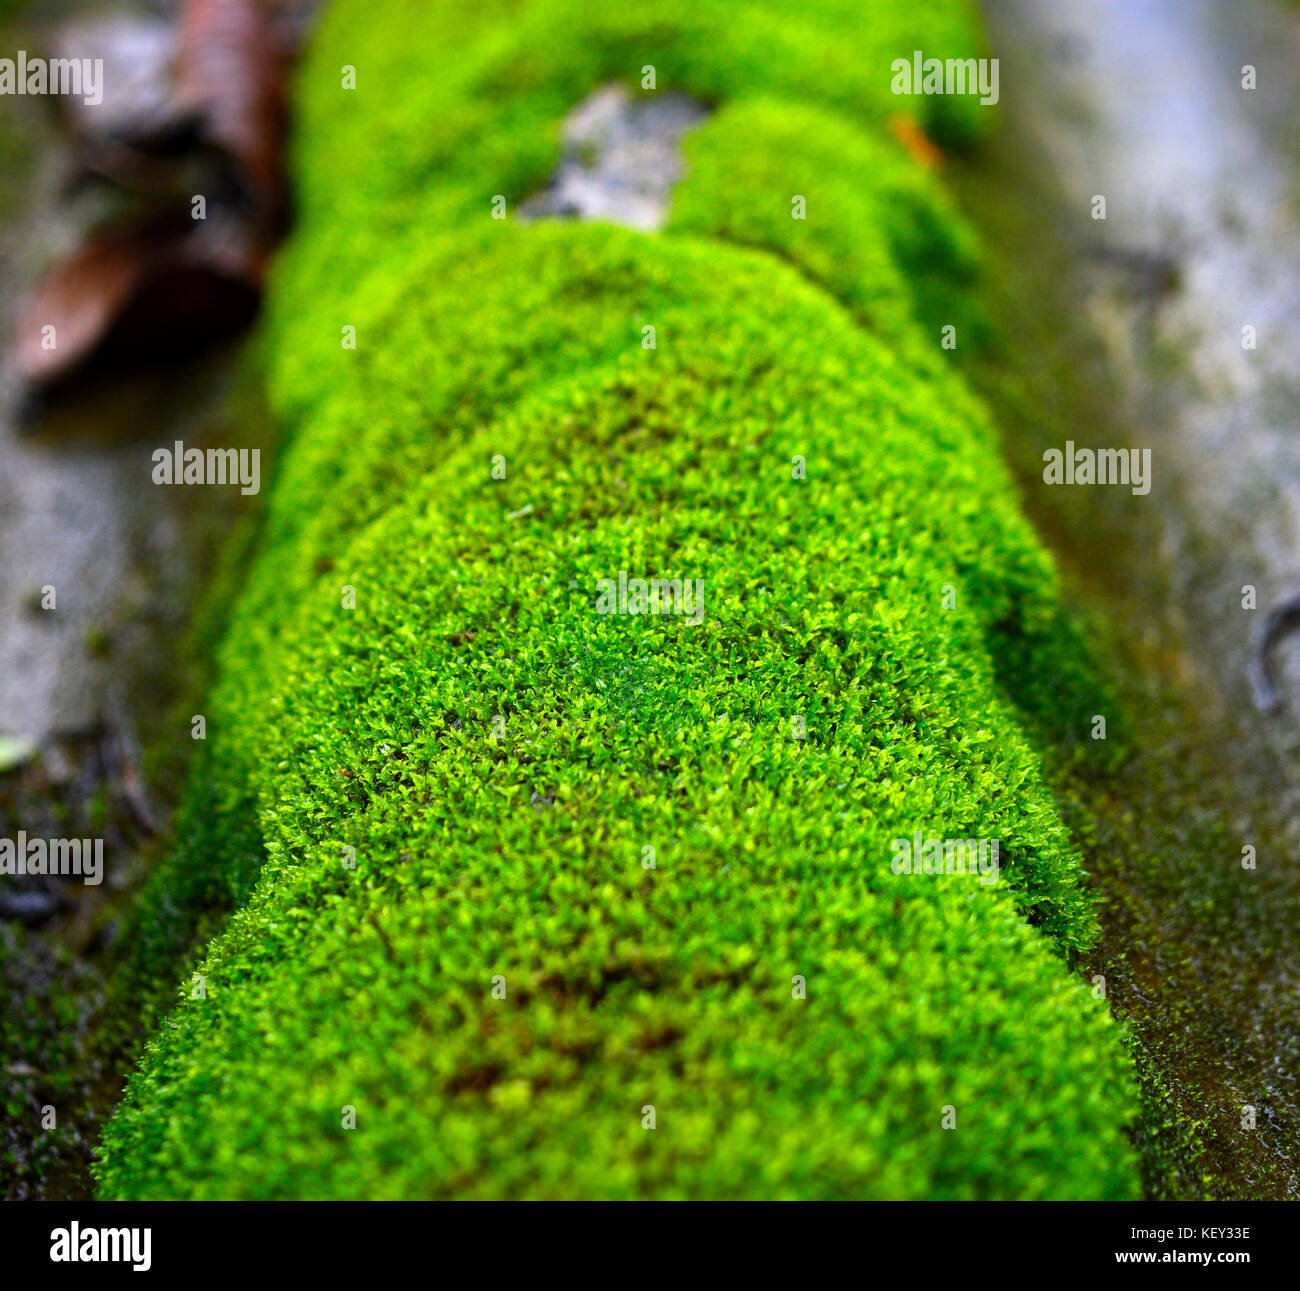 Moss on a surface Stock Photo